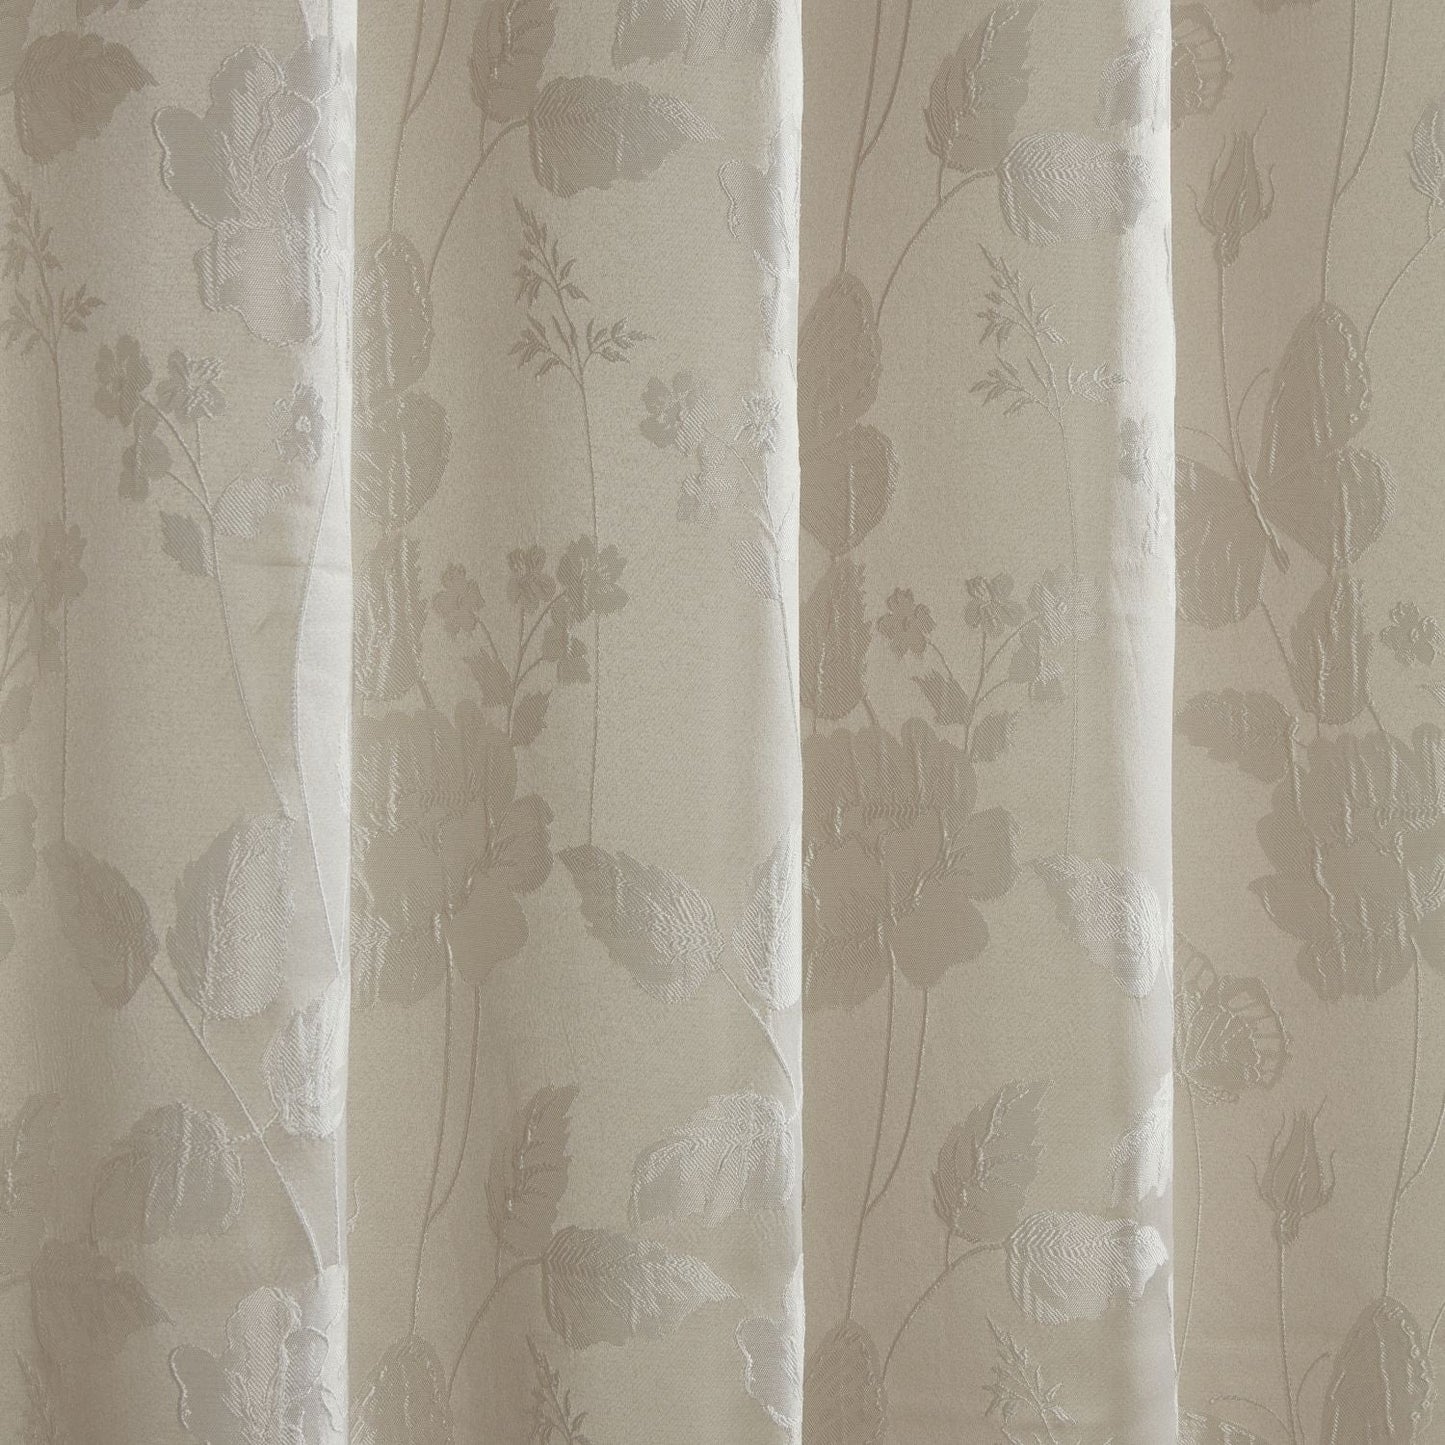 Butterfly Meadow Cream Lined Eyelet Jacquard Curtains